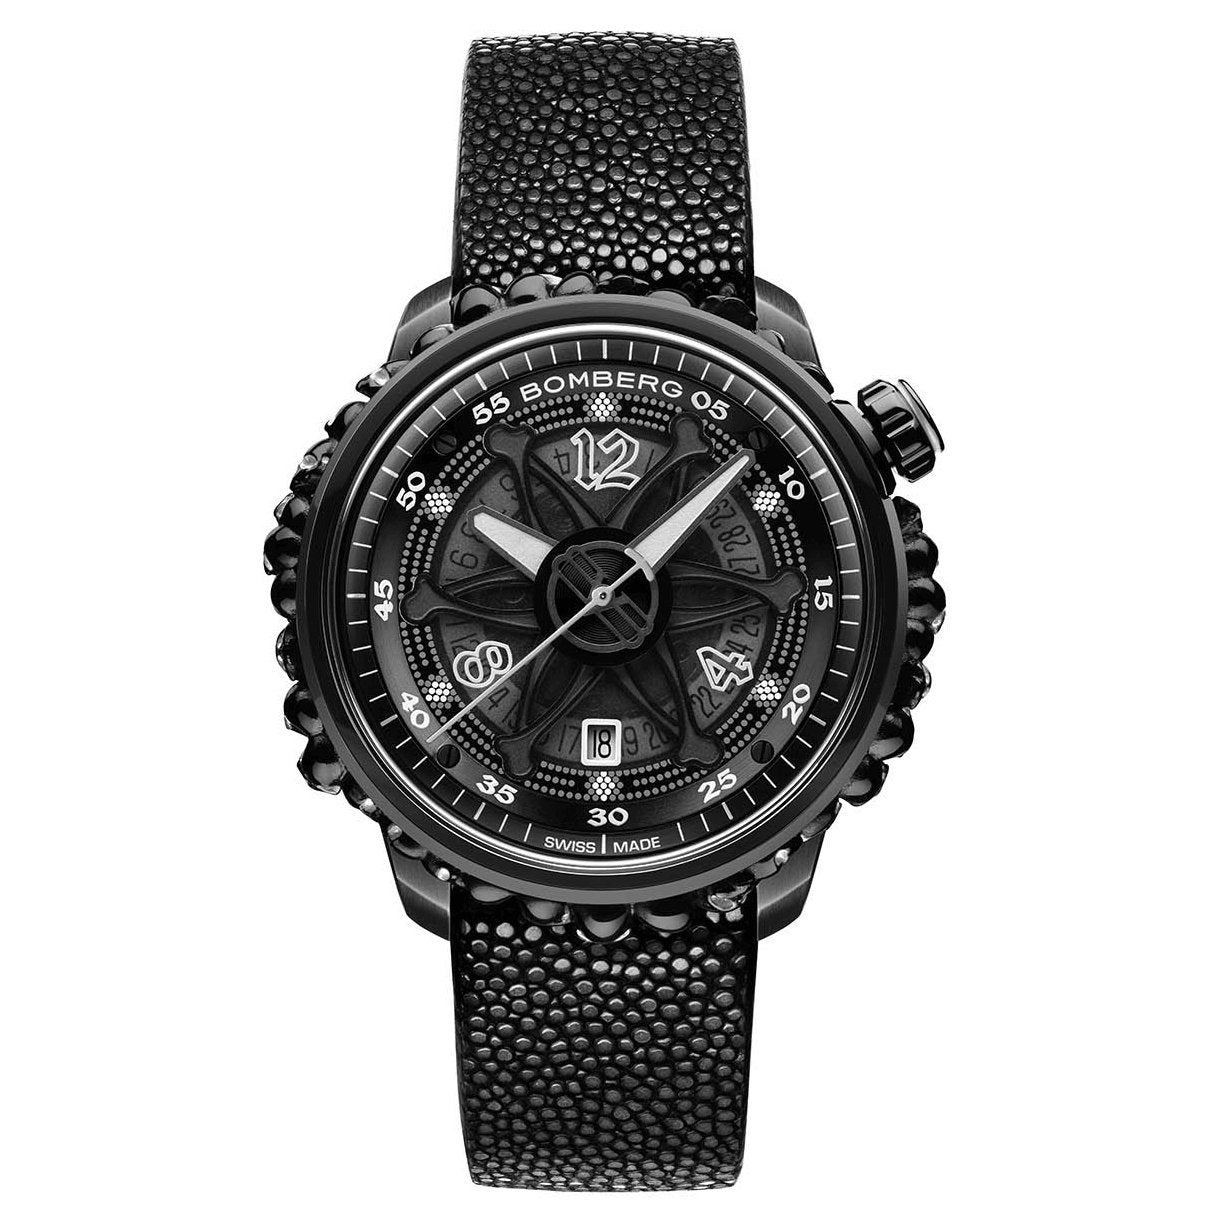 Bomberg Men's Watch BB-01 Automatic Black Catacomb Limited Edition CT43APBA.25-1.11 - Watches & Crystals